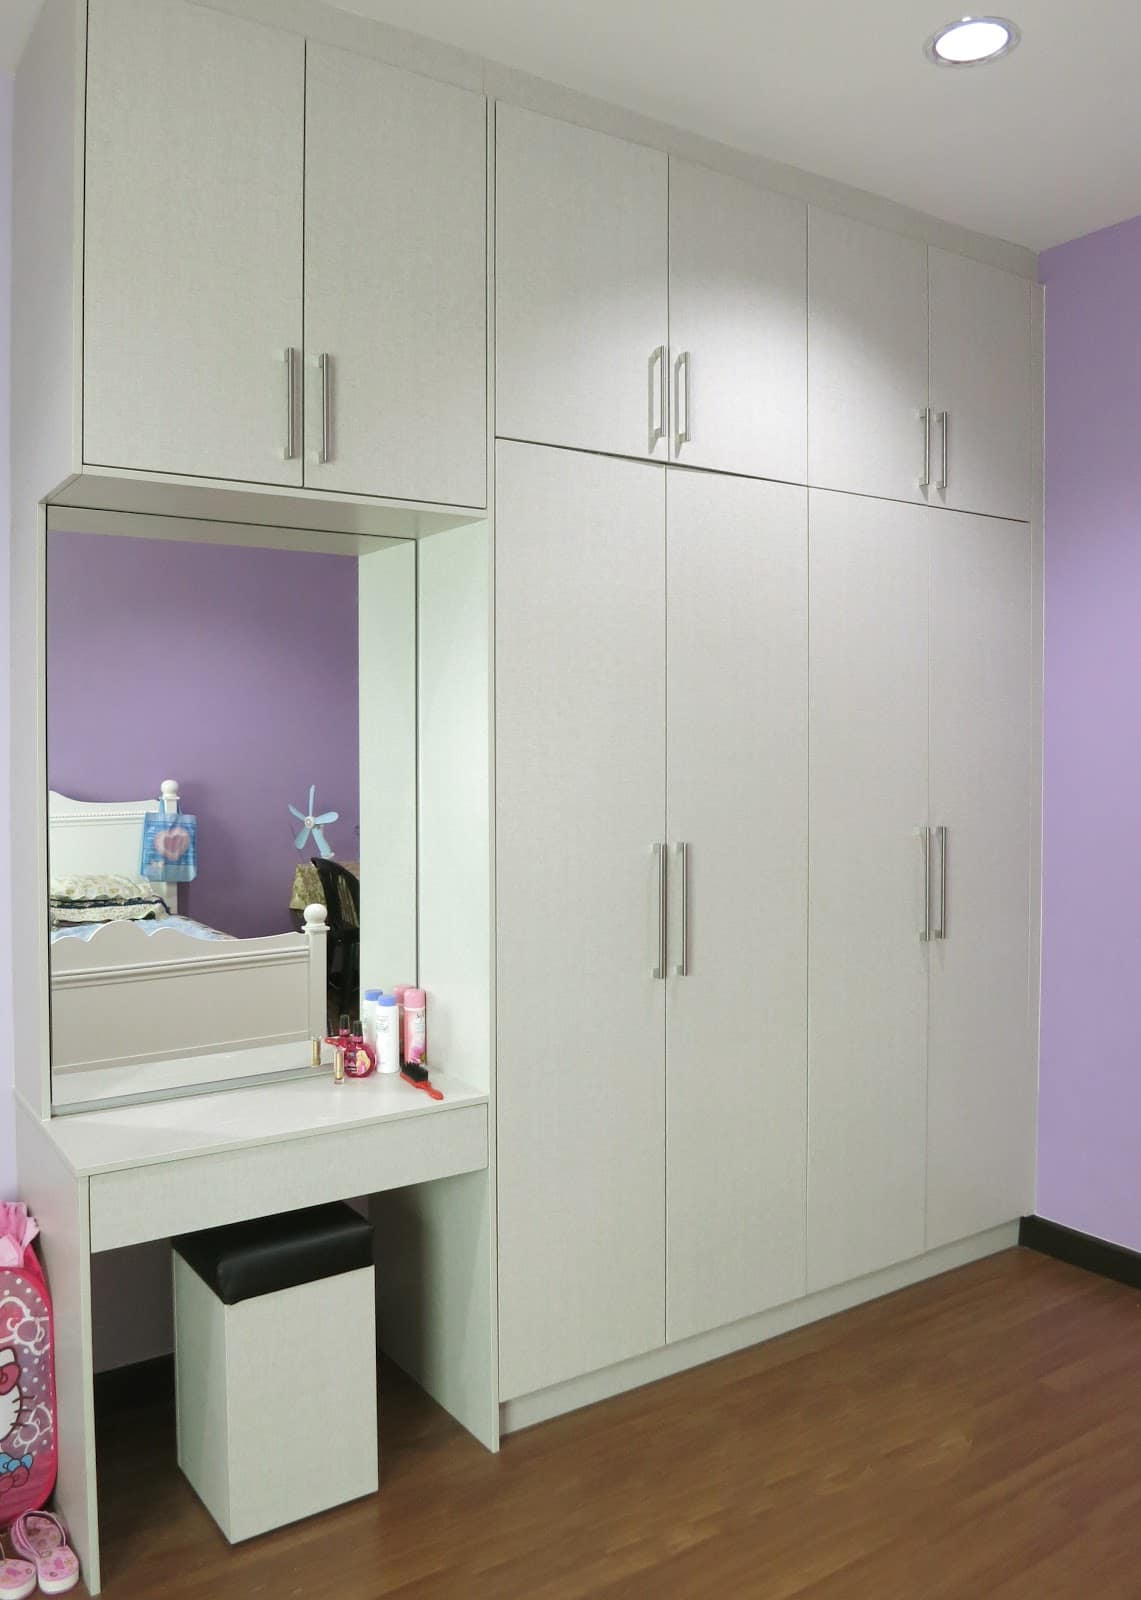 What You Need to Know Before Installing Built-In Wardrobes ...